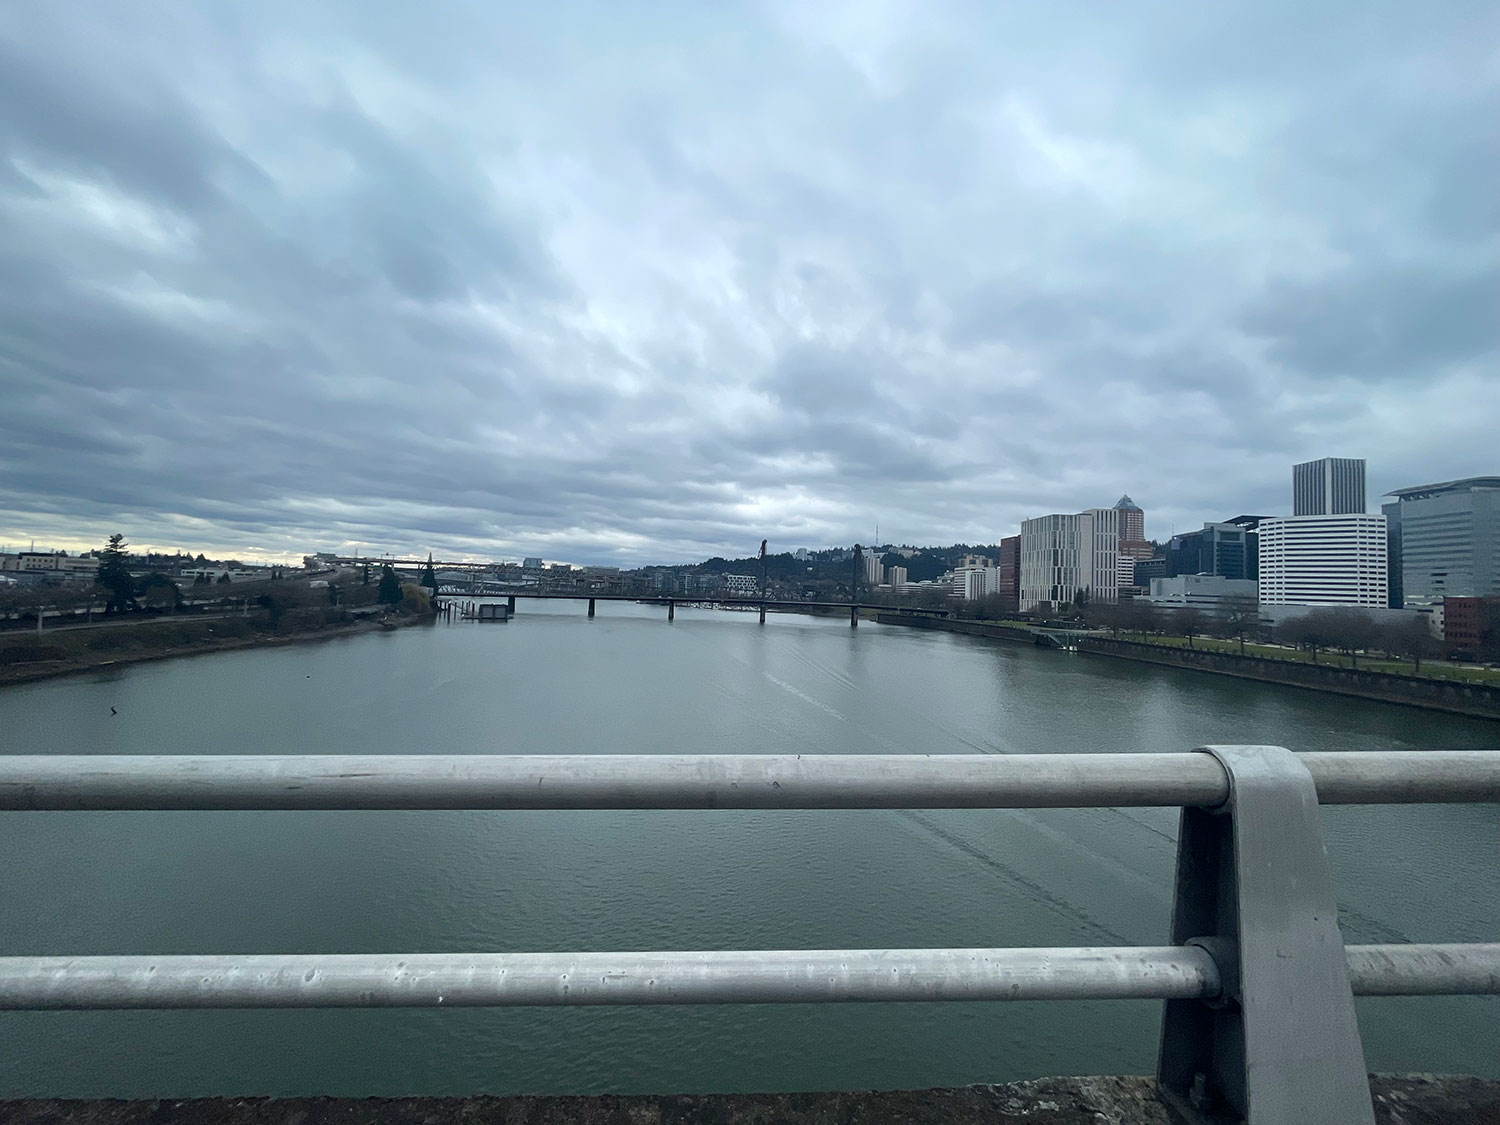 A view south from the Morrison Bridge in Portland, OR, under a cloudy sky, over wind-riffled water, to a distant urban skyline, partially blocked by the railing on the bridge